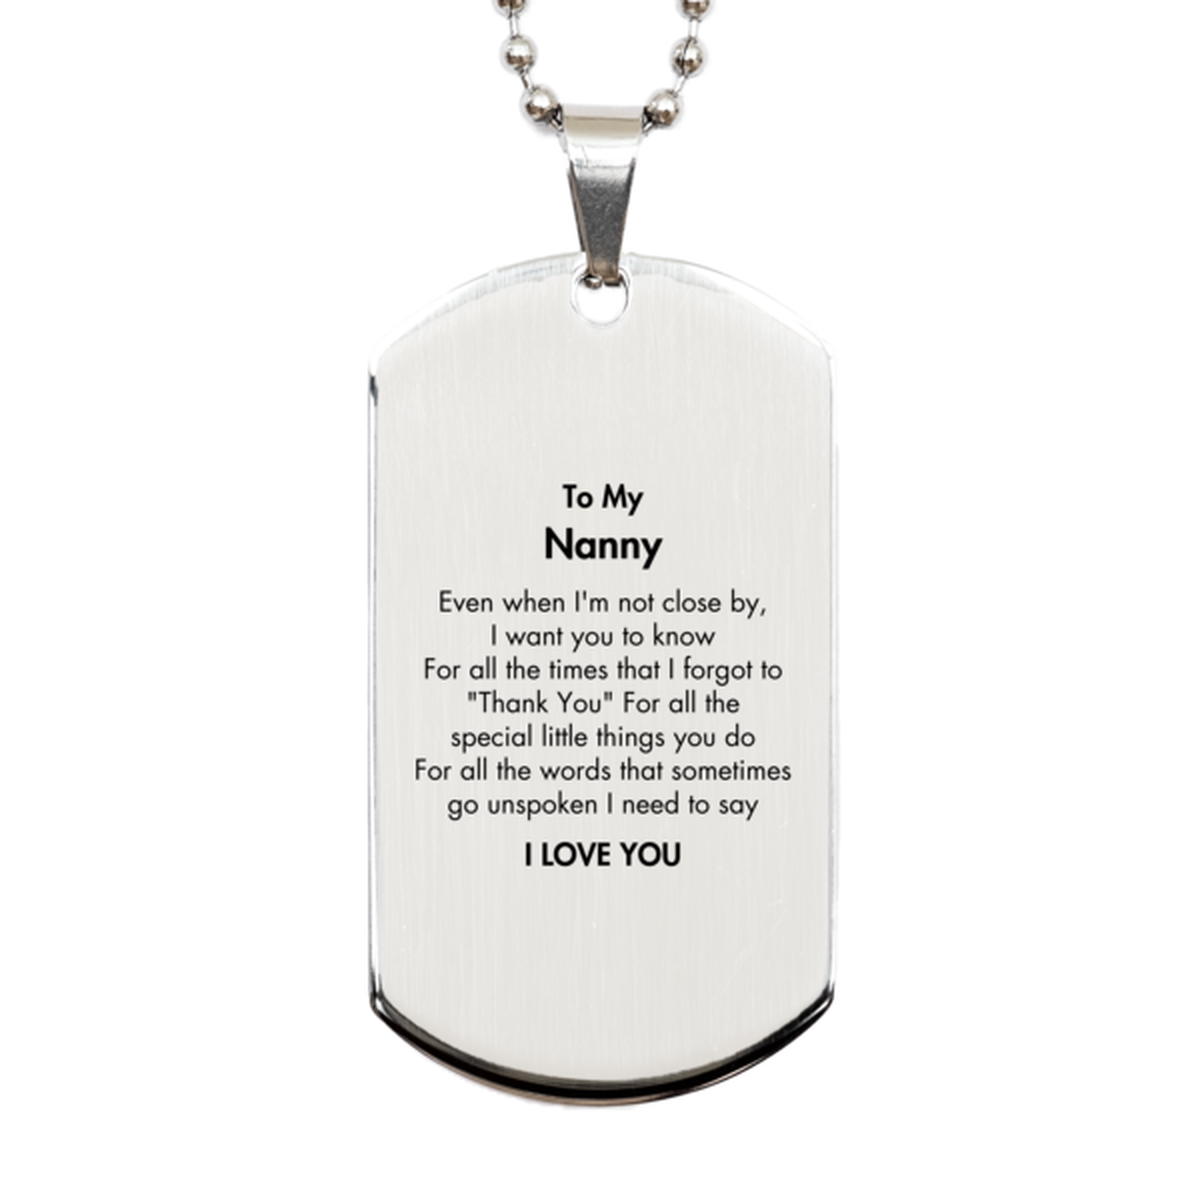 Thank You Gifts for Nanny, Keepsake Silver Dog Tag Gifts for Nanny Birthday Mother's day Father's Day Nanny For all the words That sometimes go unspoken I need to say I LOVE YOU